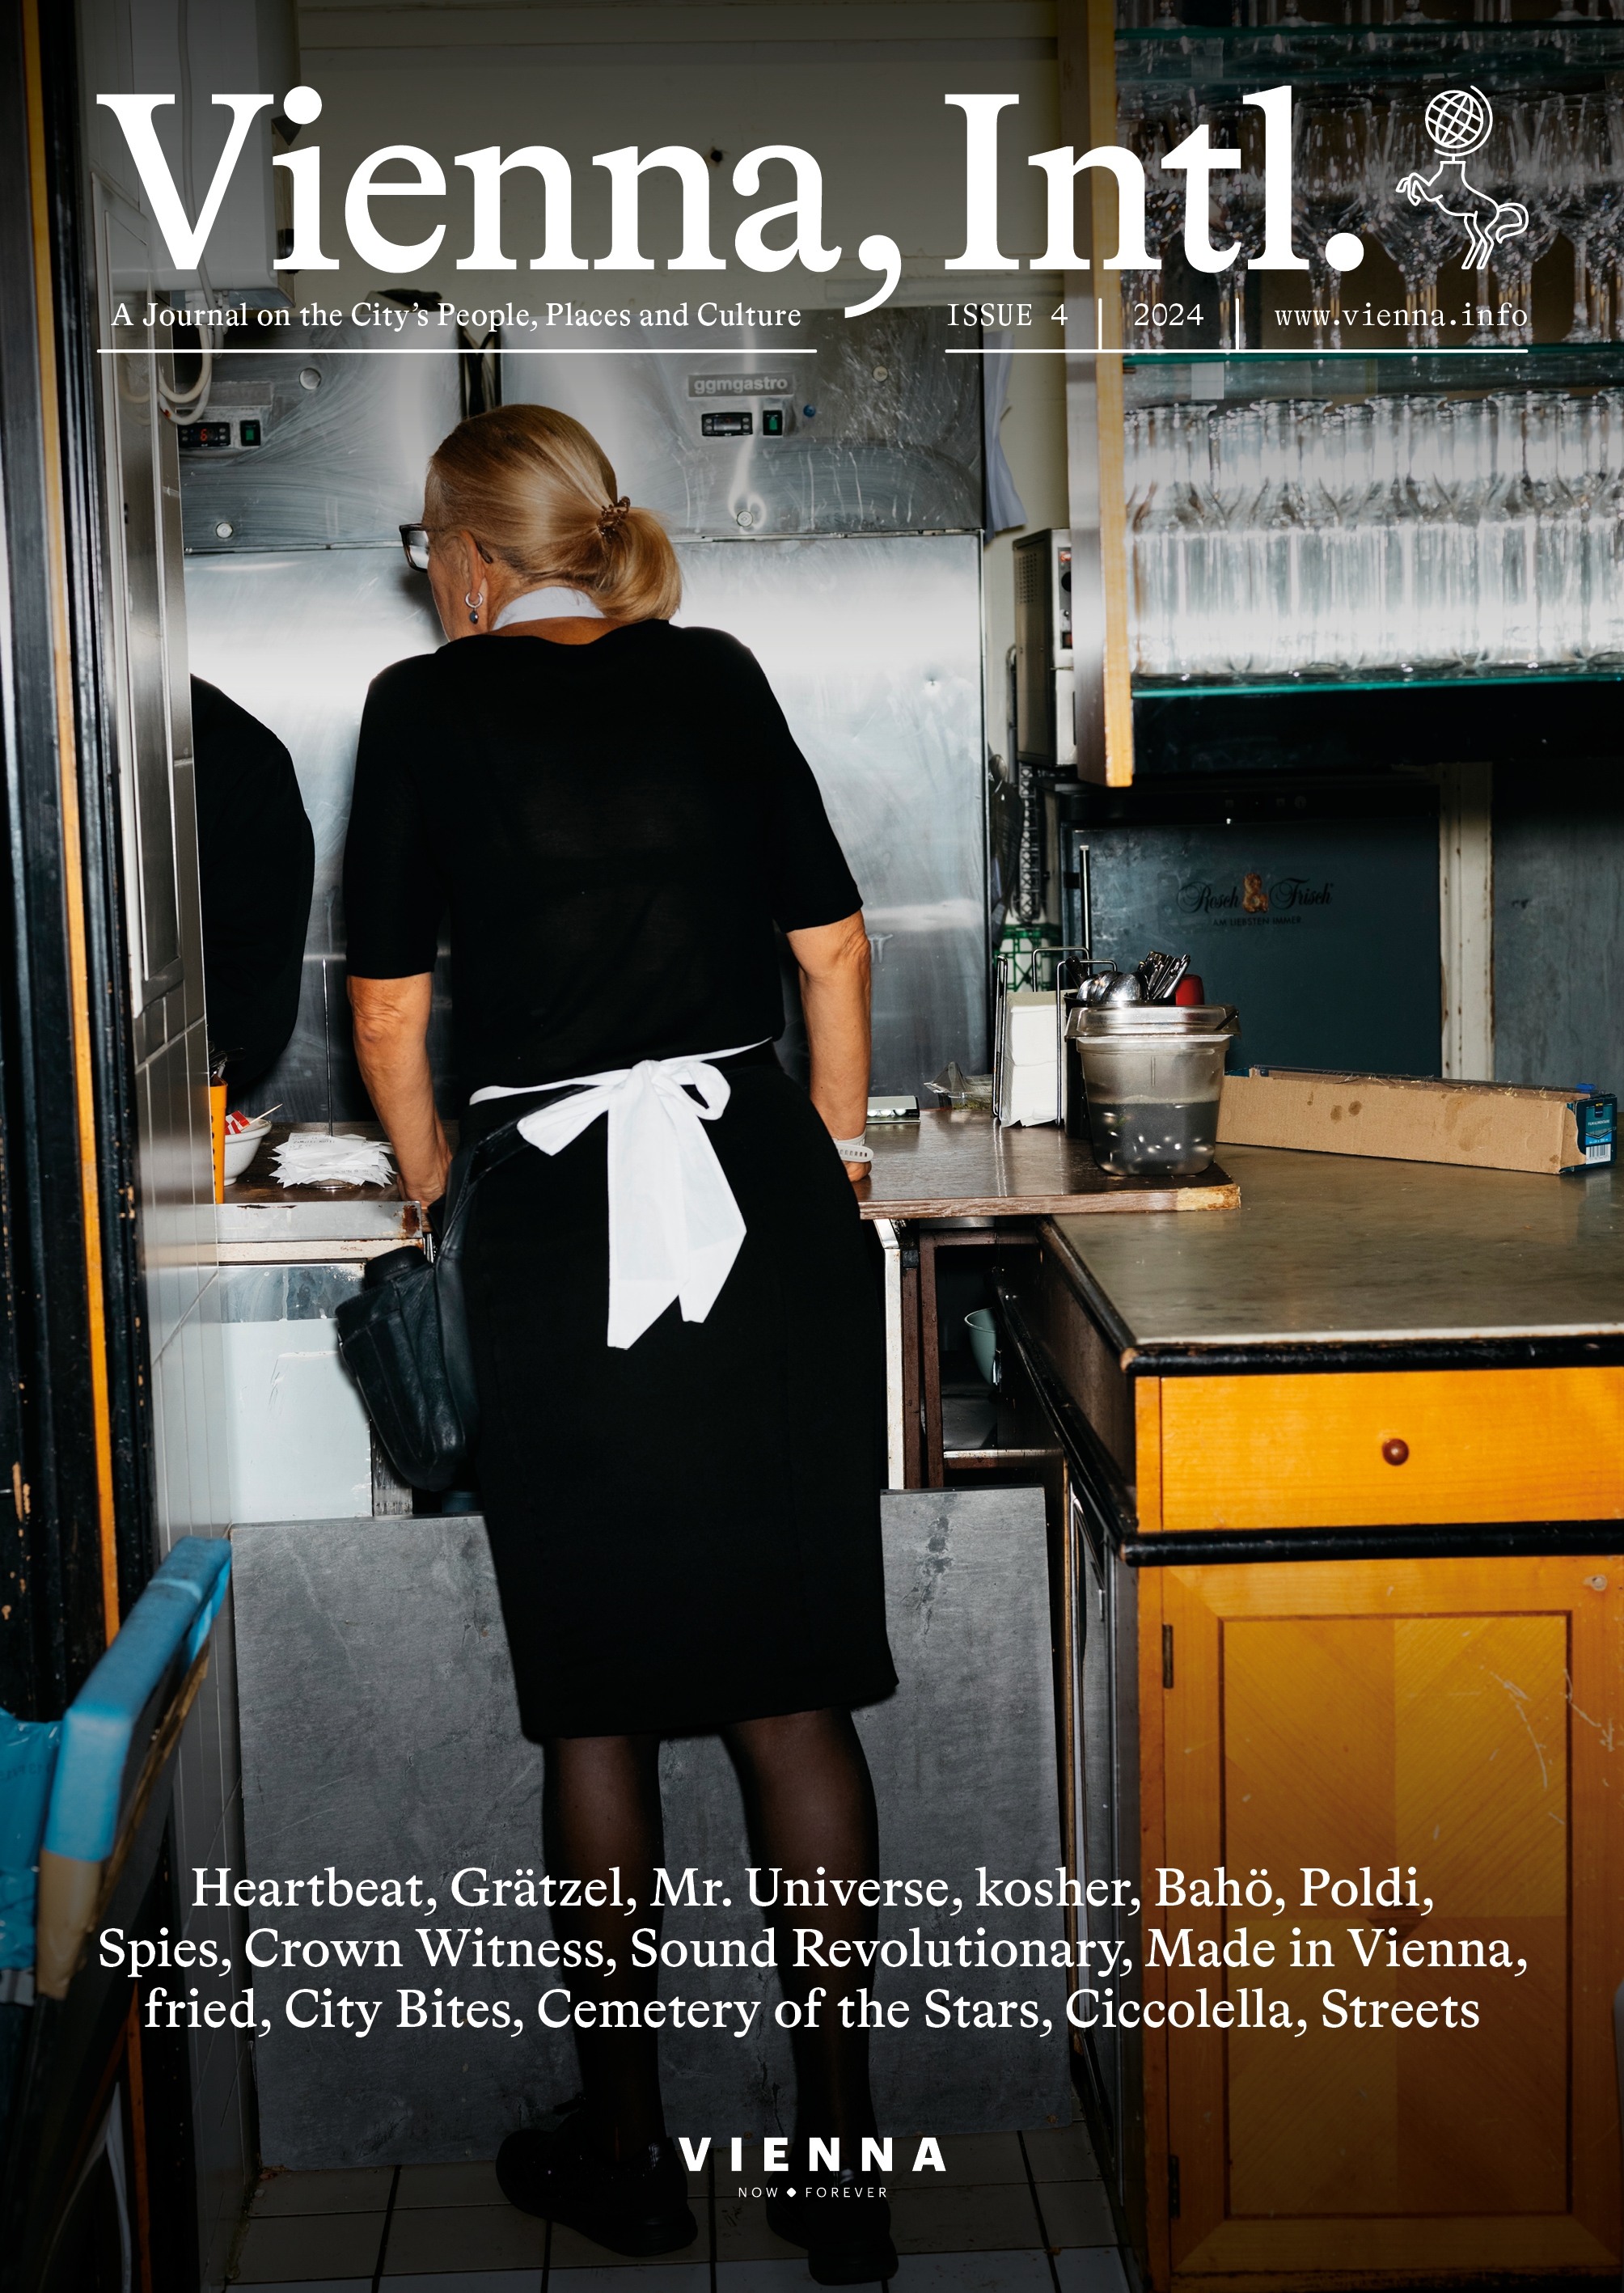 Vienna, Intl. magazine cover photo (issue 2024), showing a waitress dressed in black with a white apron from behind. 